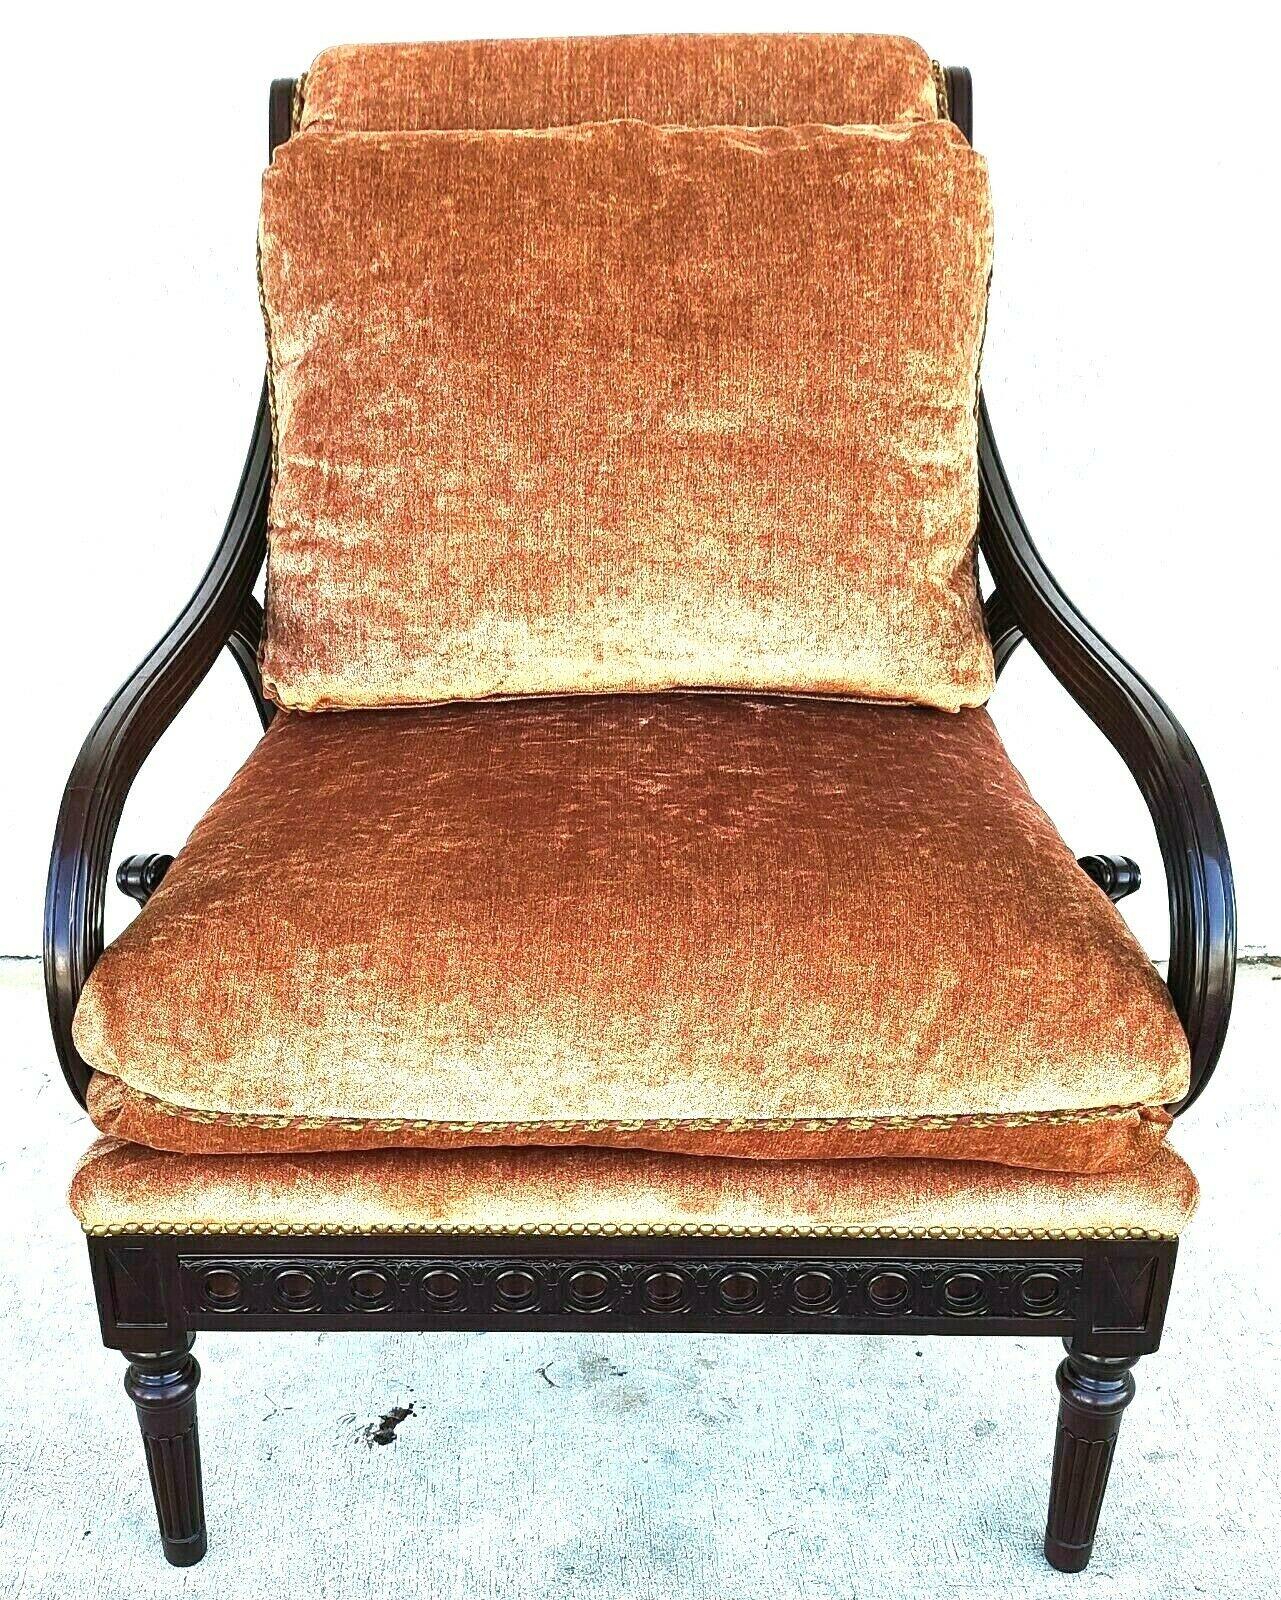 For FULL item description click on READ MORE below. 

Offering One Of Our Recent Palm Beach Estate Fine Furniture Acquisitions Of A 

Regency Style Scroll Mahogany Armchair by CLASSICS Furniture of North Carolina
With Down surrounded foam core